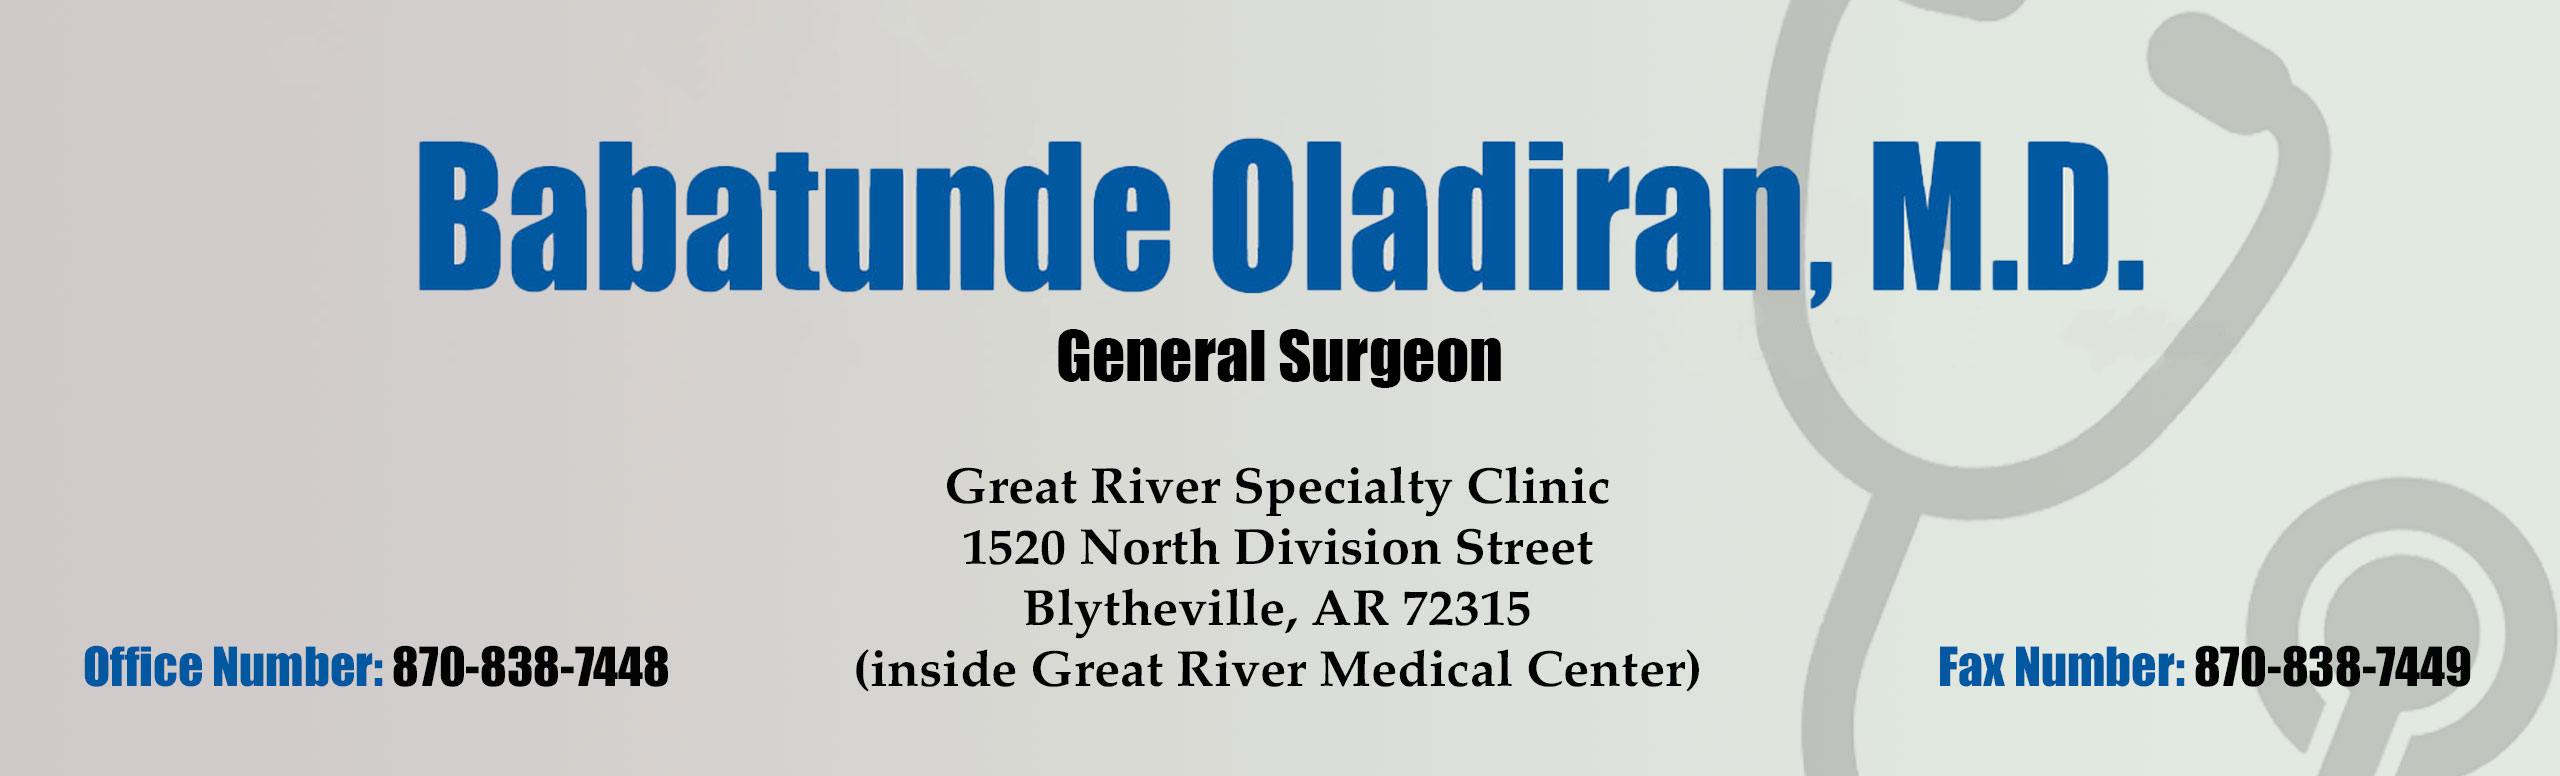 Babatunde Oladiran, M.D.

General Surgeon

Great River Specialty Clinic
1520 North Division Street
Blytheville, AK 72315
(Inside Greater River Medical Center)

Office Number: (870) 838-7448
Fax Number: (870) 8387449